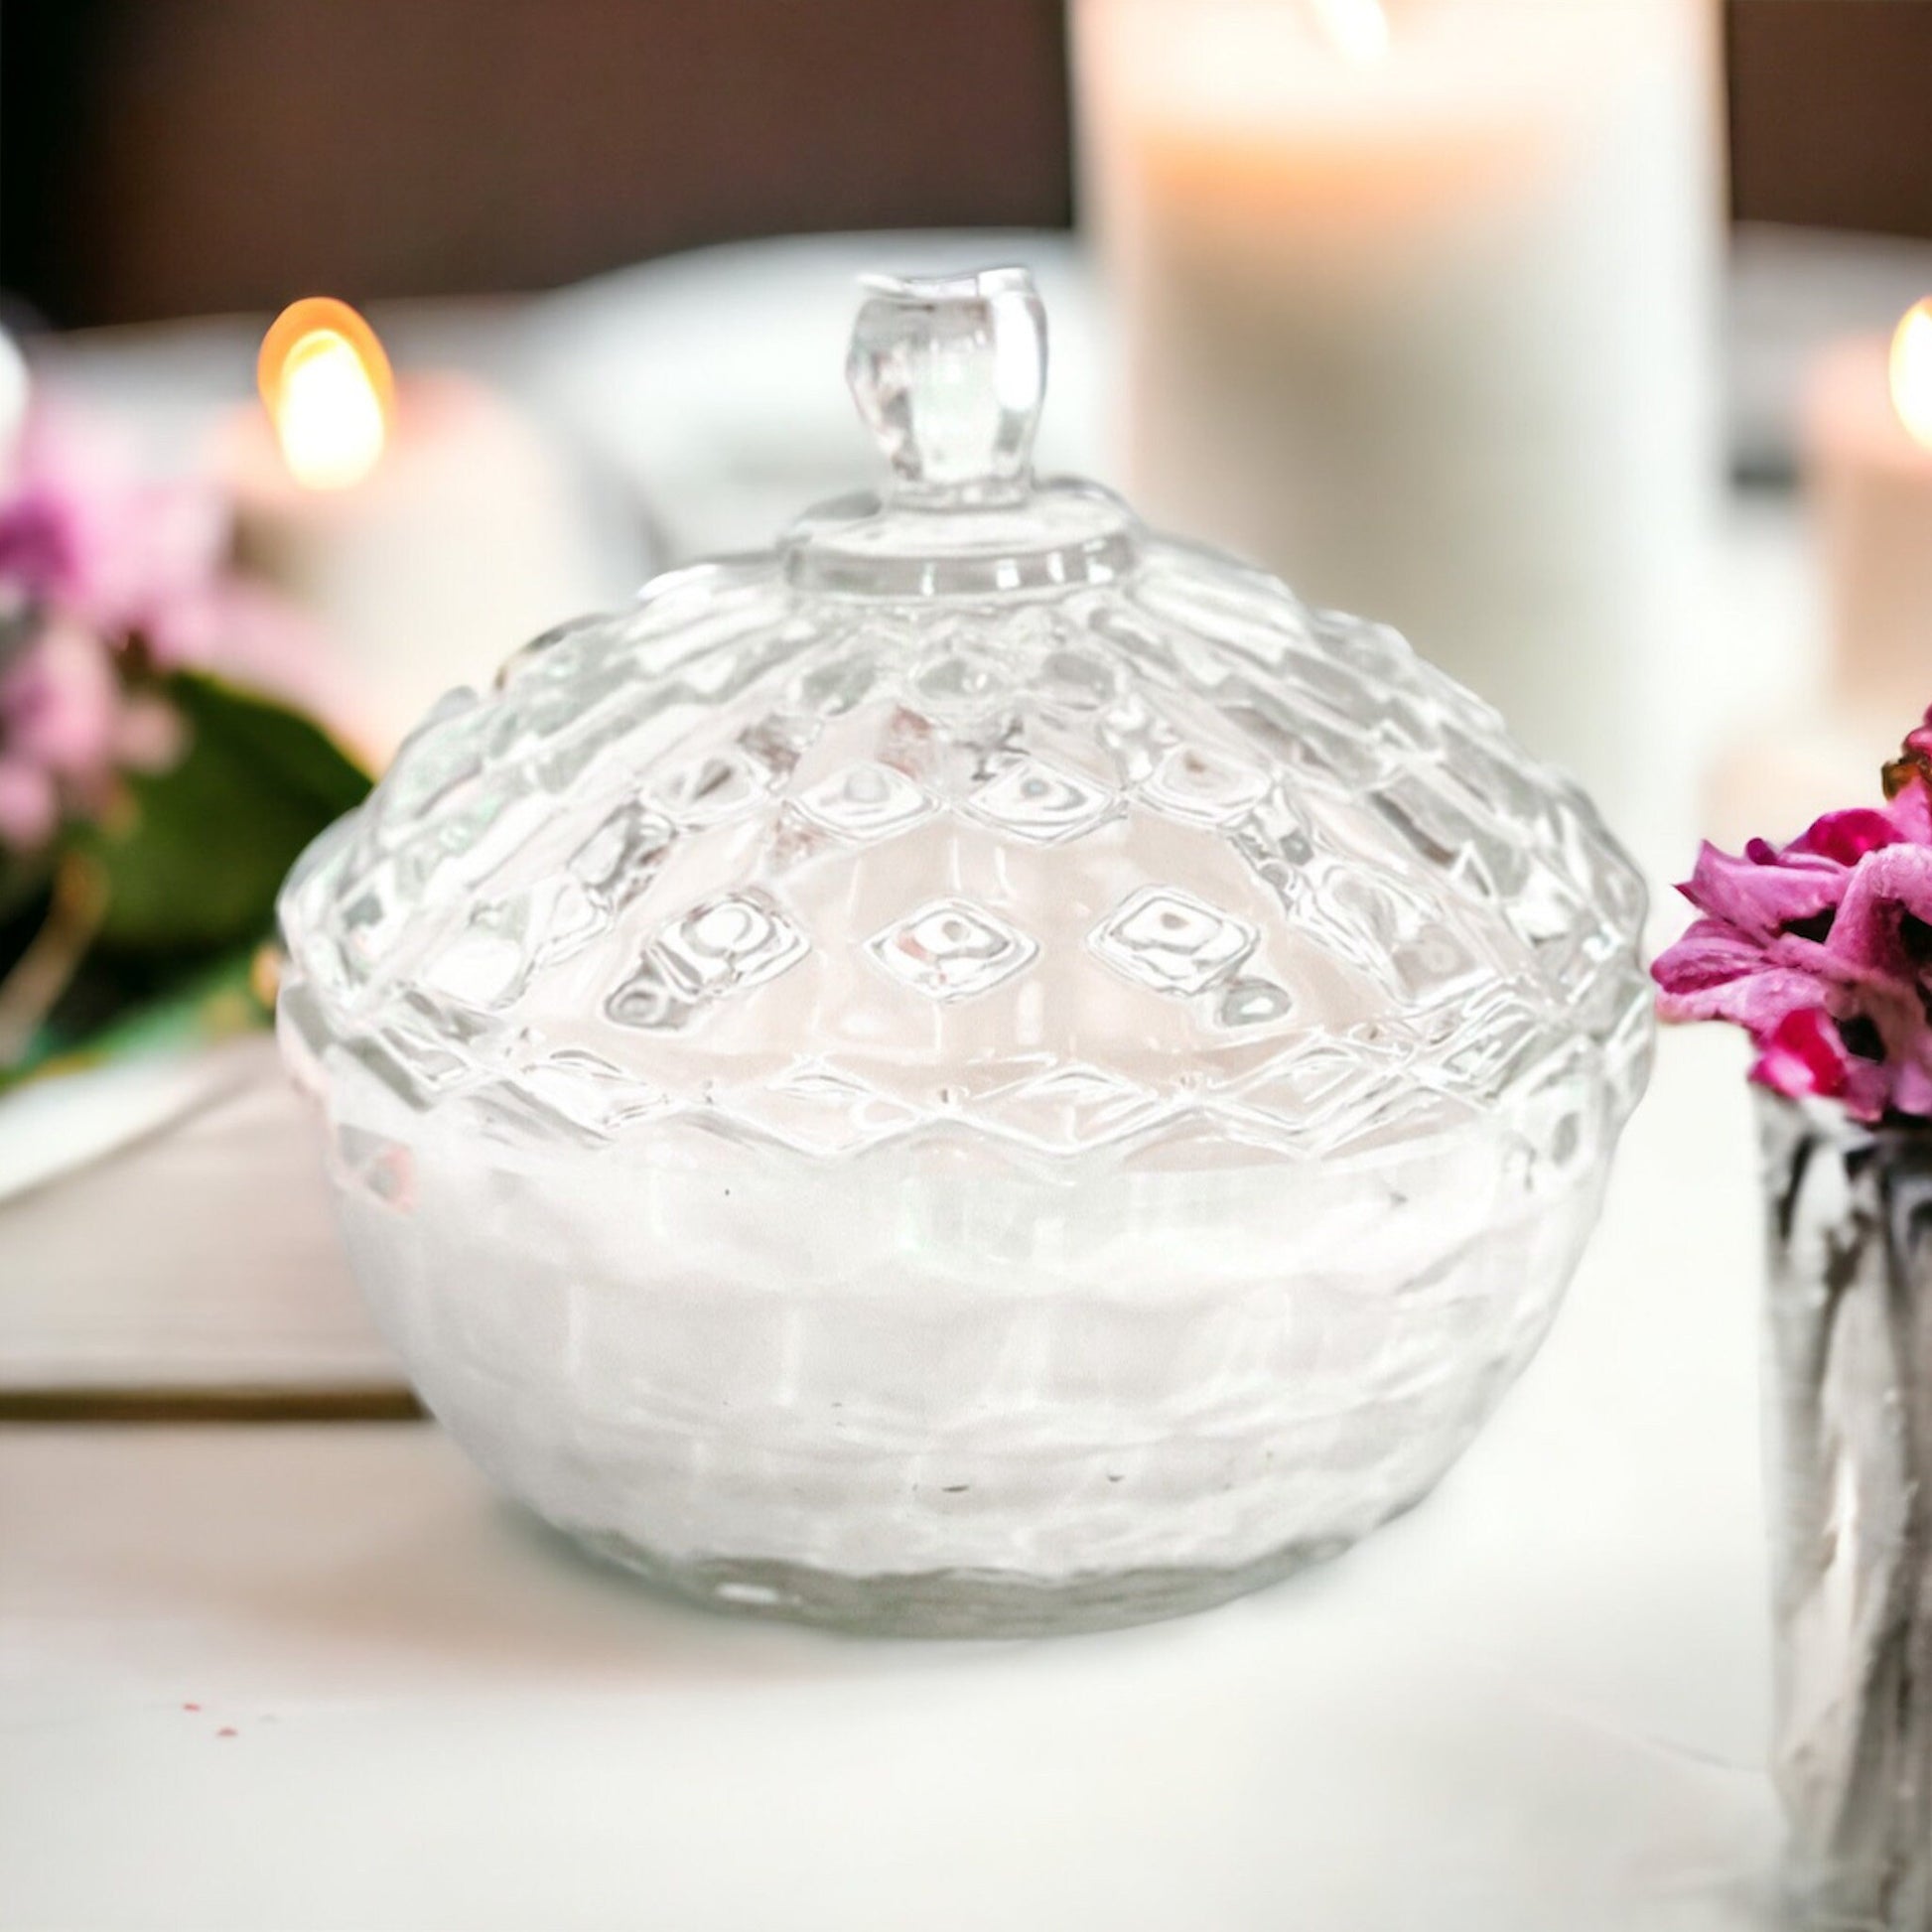 Soy Candle in Vintage Candy Dish